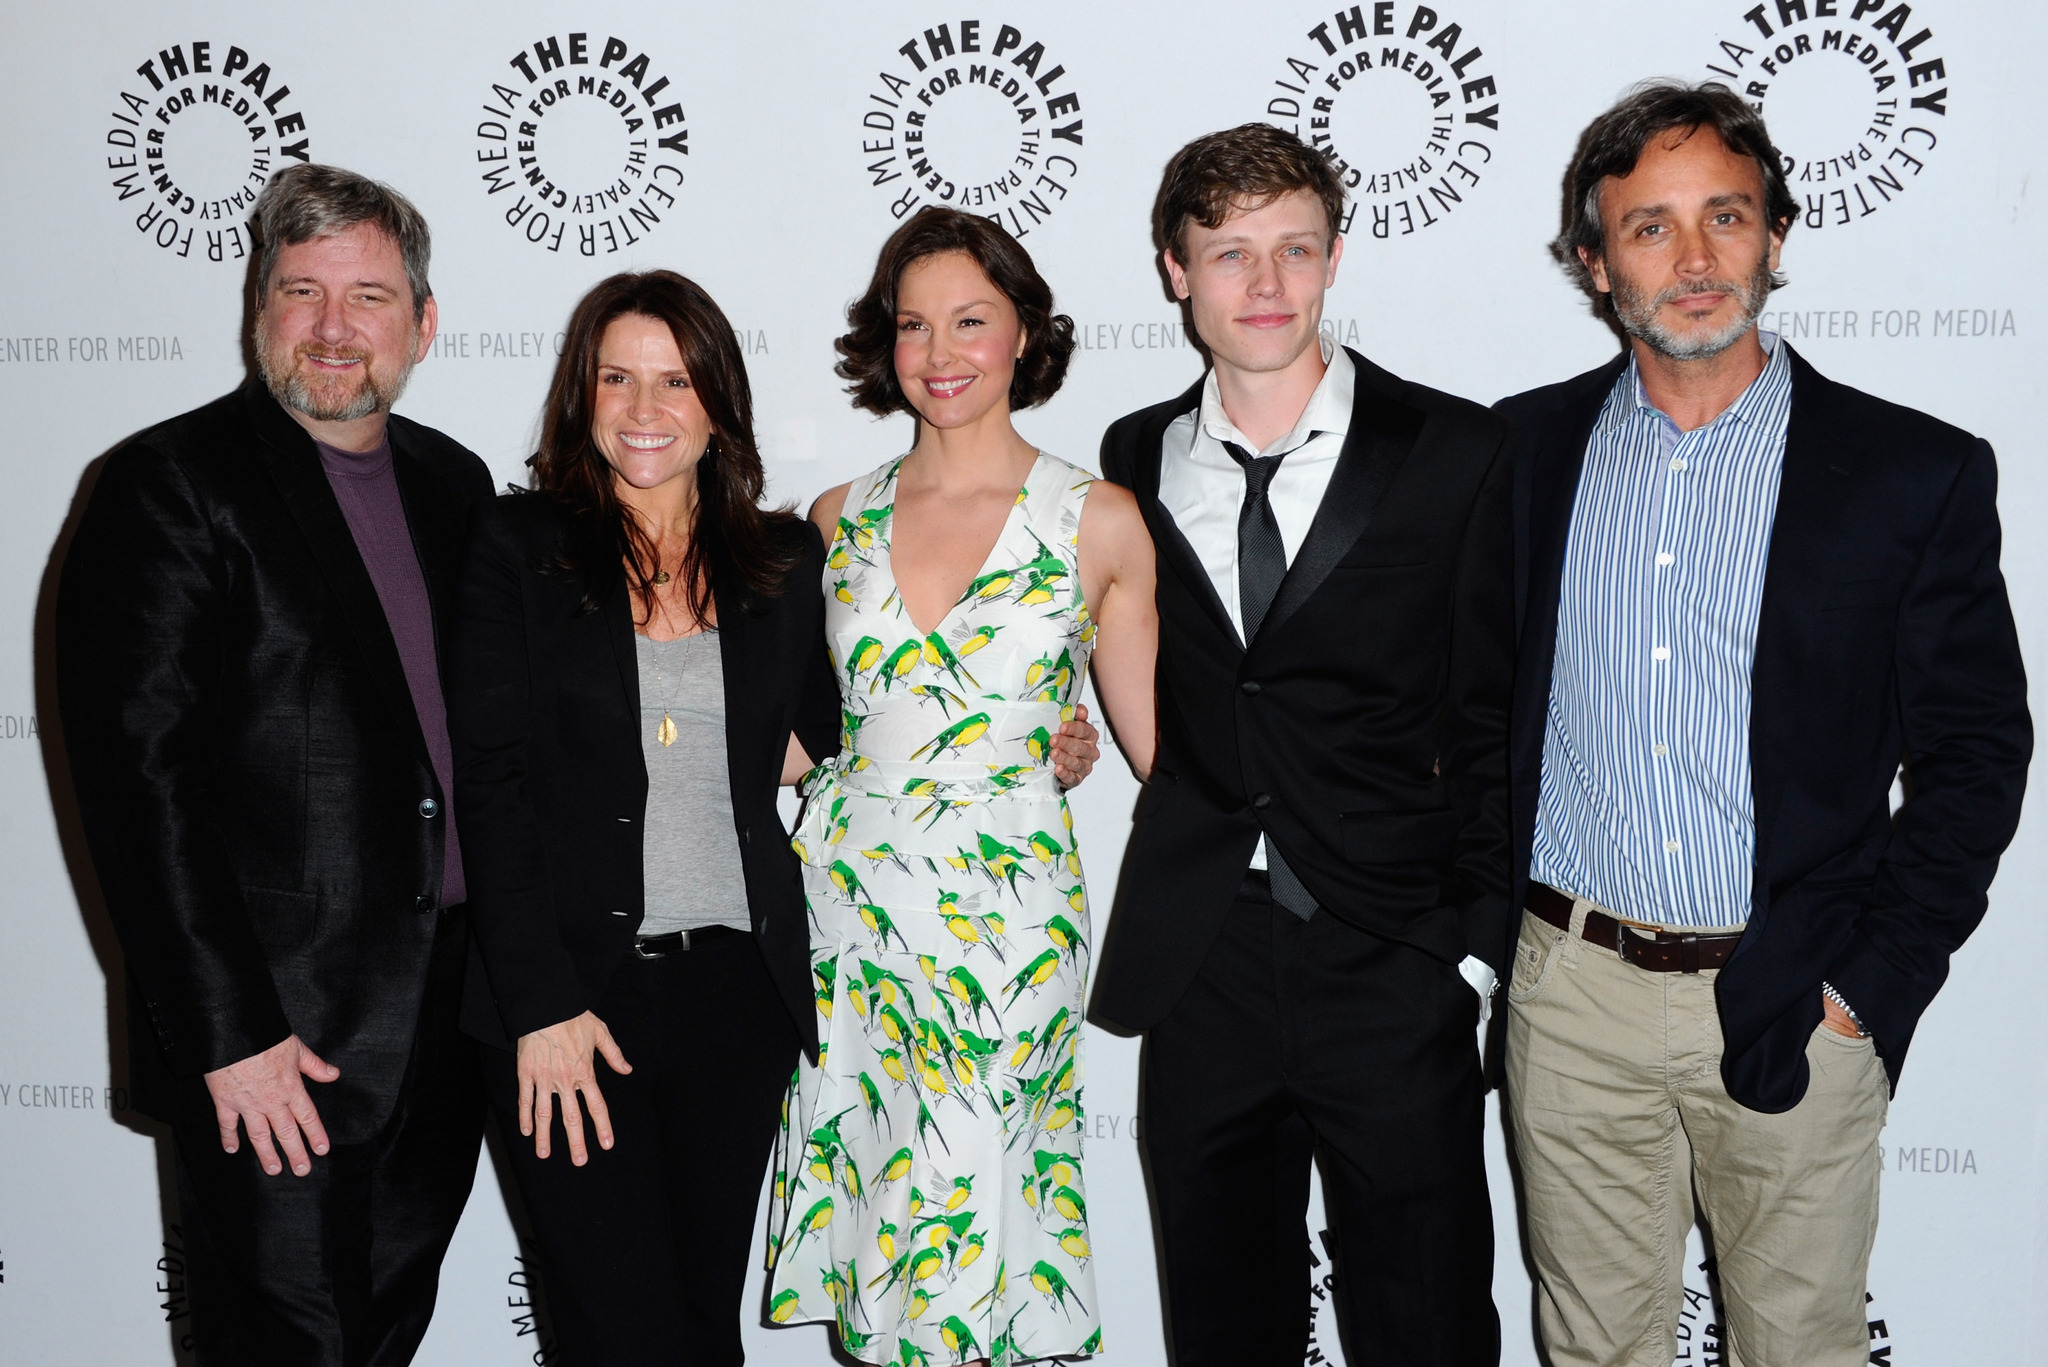 Ashley Judd, Gregory Poirier, Gina Matthews, Grant Scharbo and Nick Eversman at event of Missing (2012)